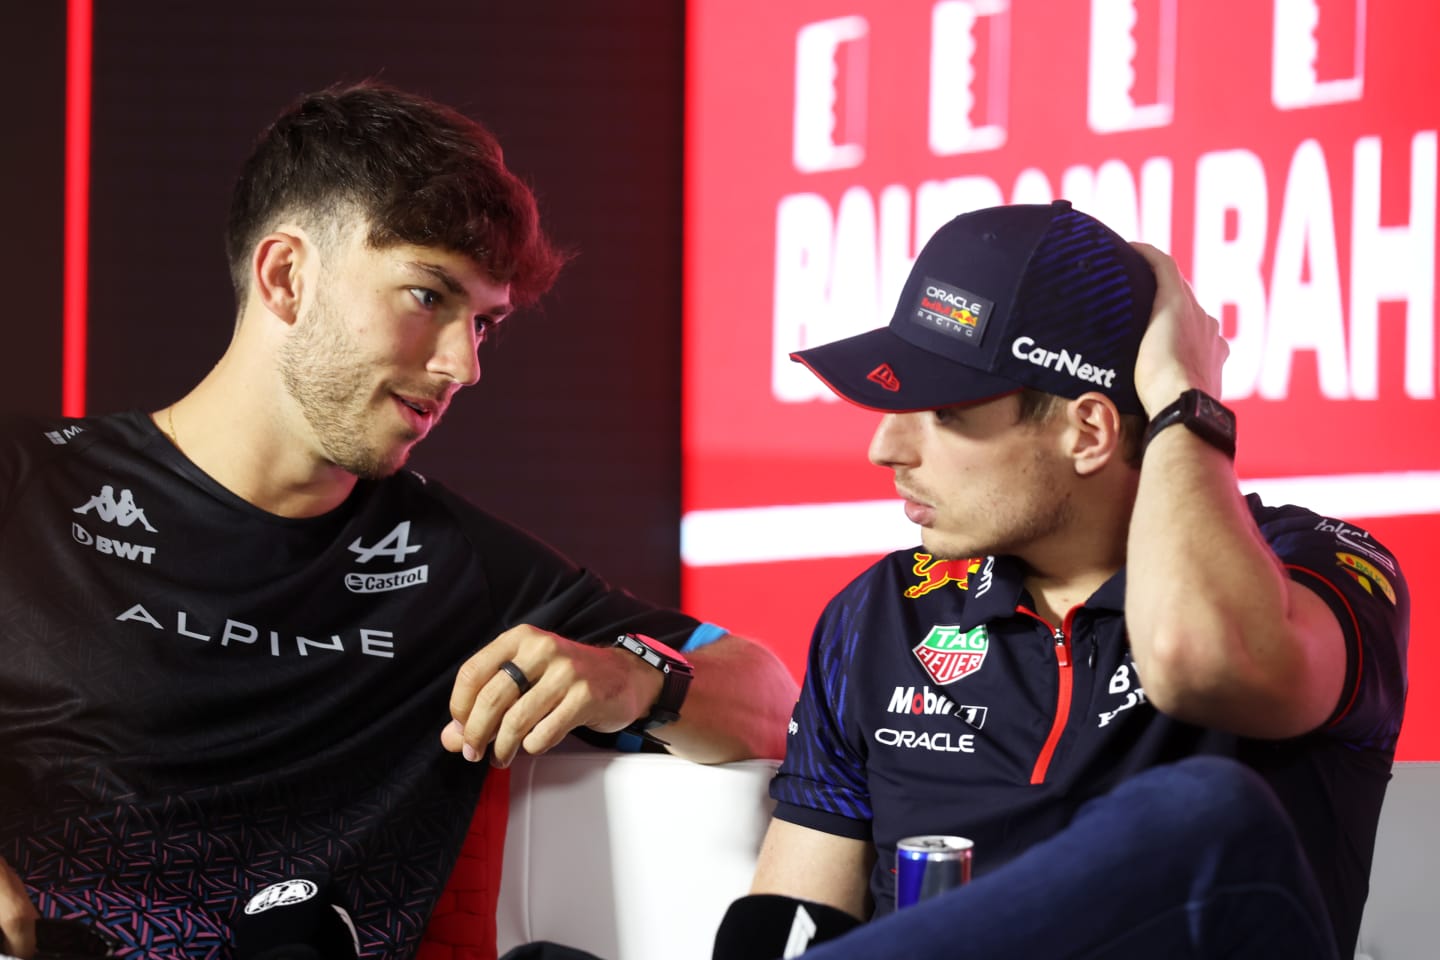 BAHRAIN, BAHRAIN - MARCH 02: Pierre Gasly of France and Alpine F1 and Max Verstappen of the Netherlands and Oracle Red Bull Racing talk in the Drivers Press Conference during previews ahead of the F1 Grand Prix of Bahrain at Bahrain International Circuit on March 02, 2023 in Bahrain, Bahrain. (Photo by Lars Baron/Getty Images)